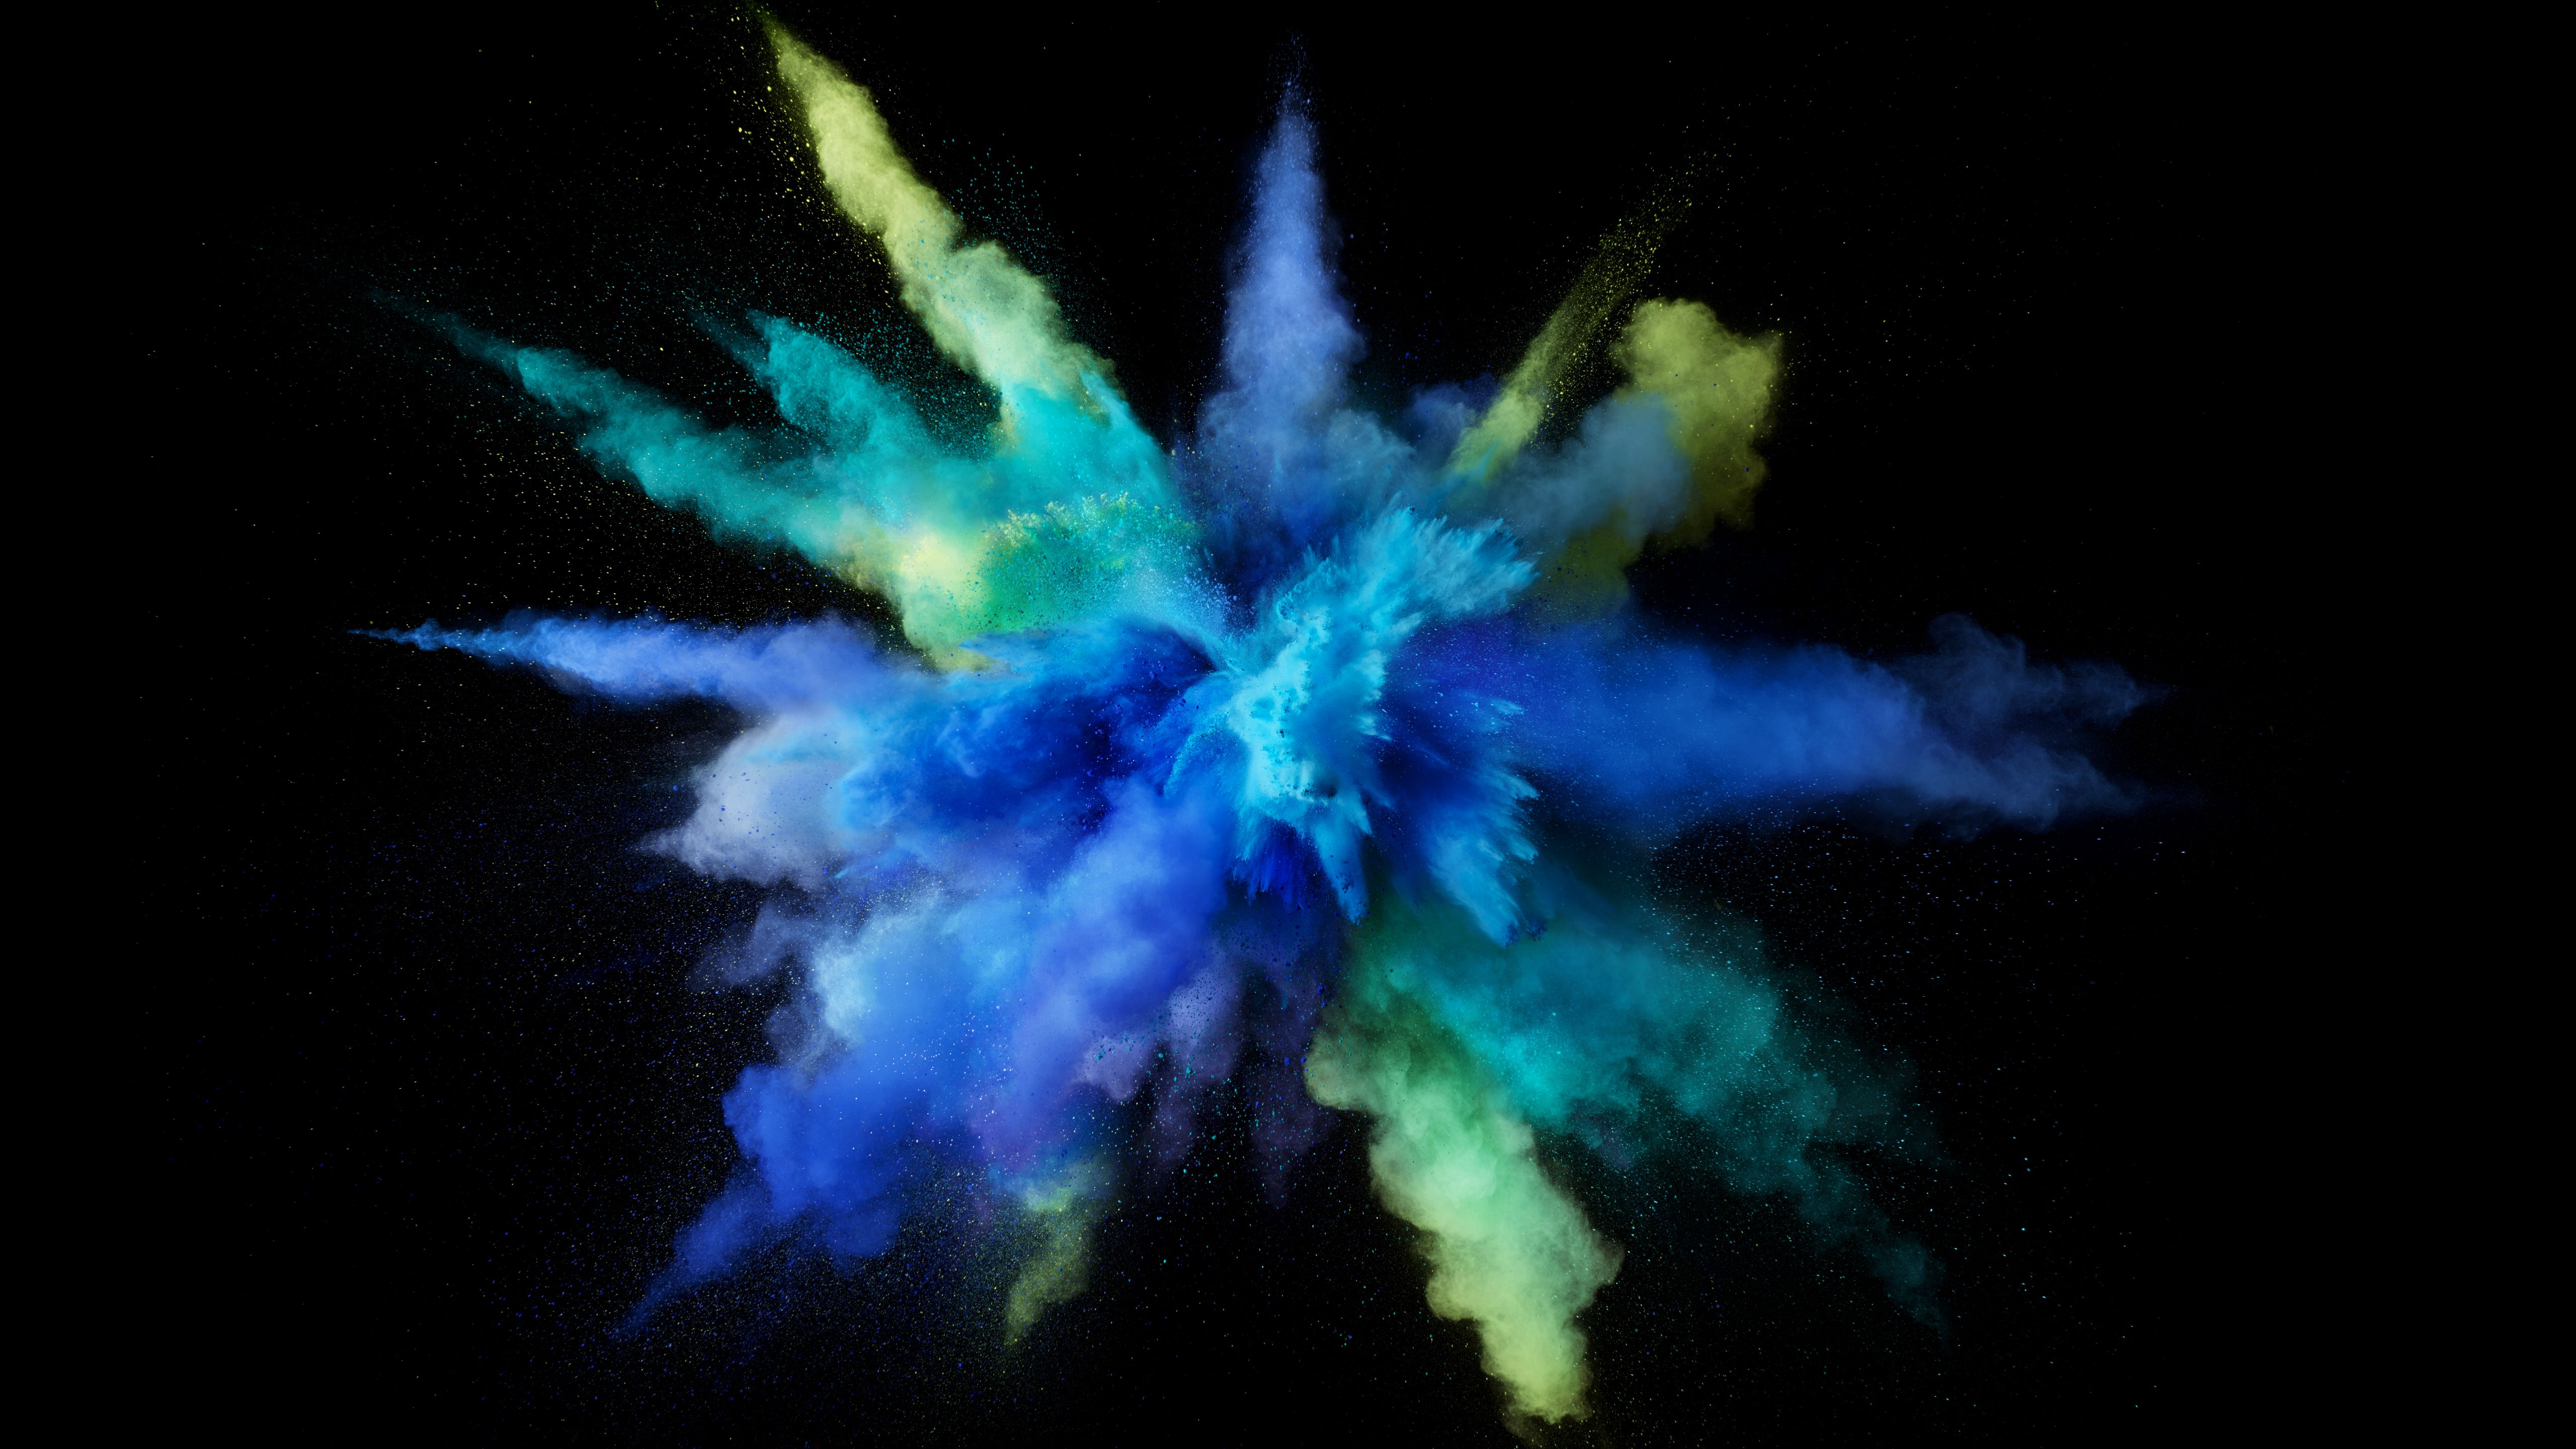 macOS 10.12.2 beta 4 includes new 'Color Burst' wallpapers from